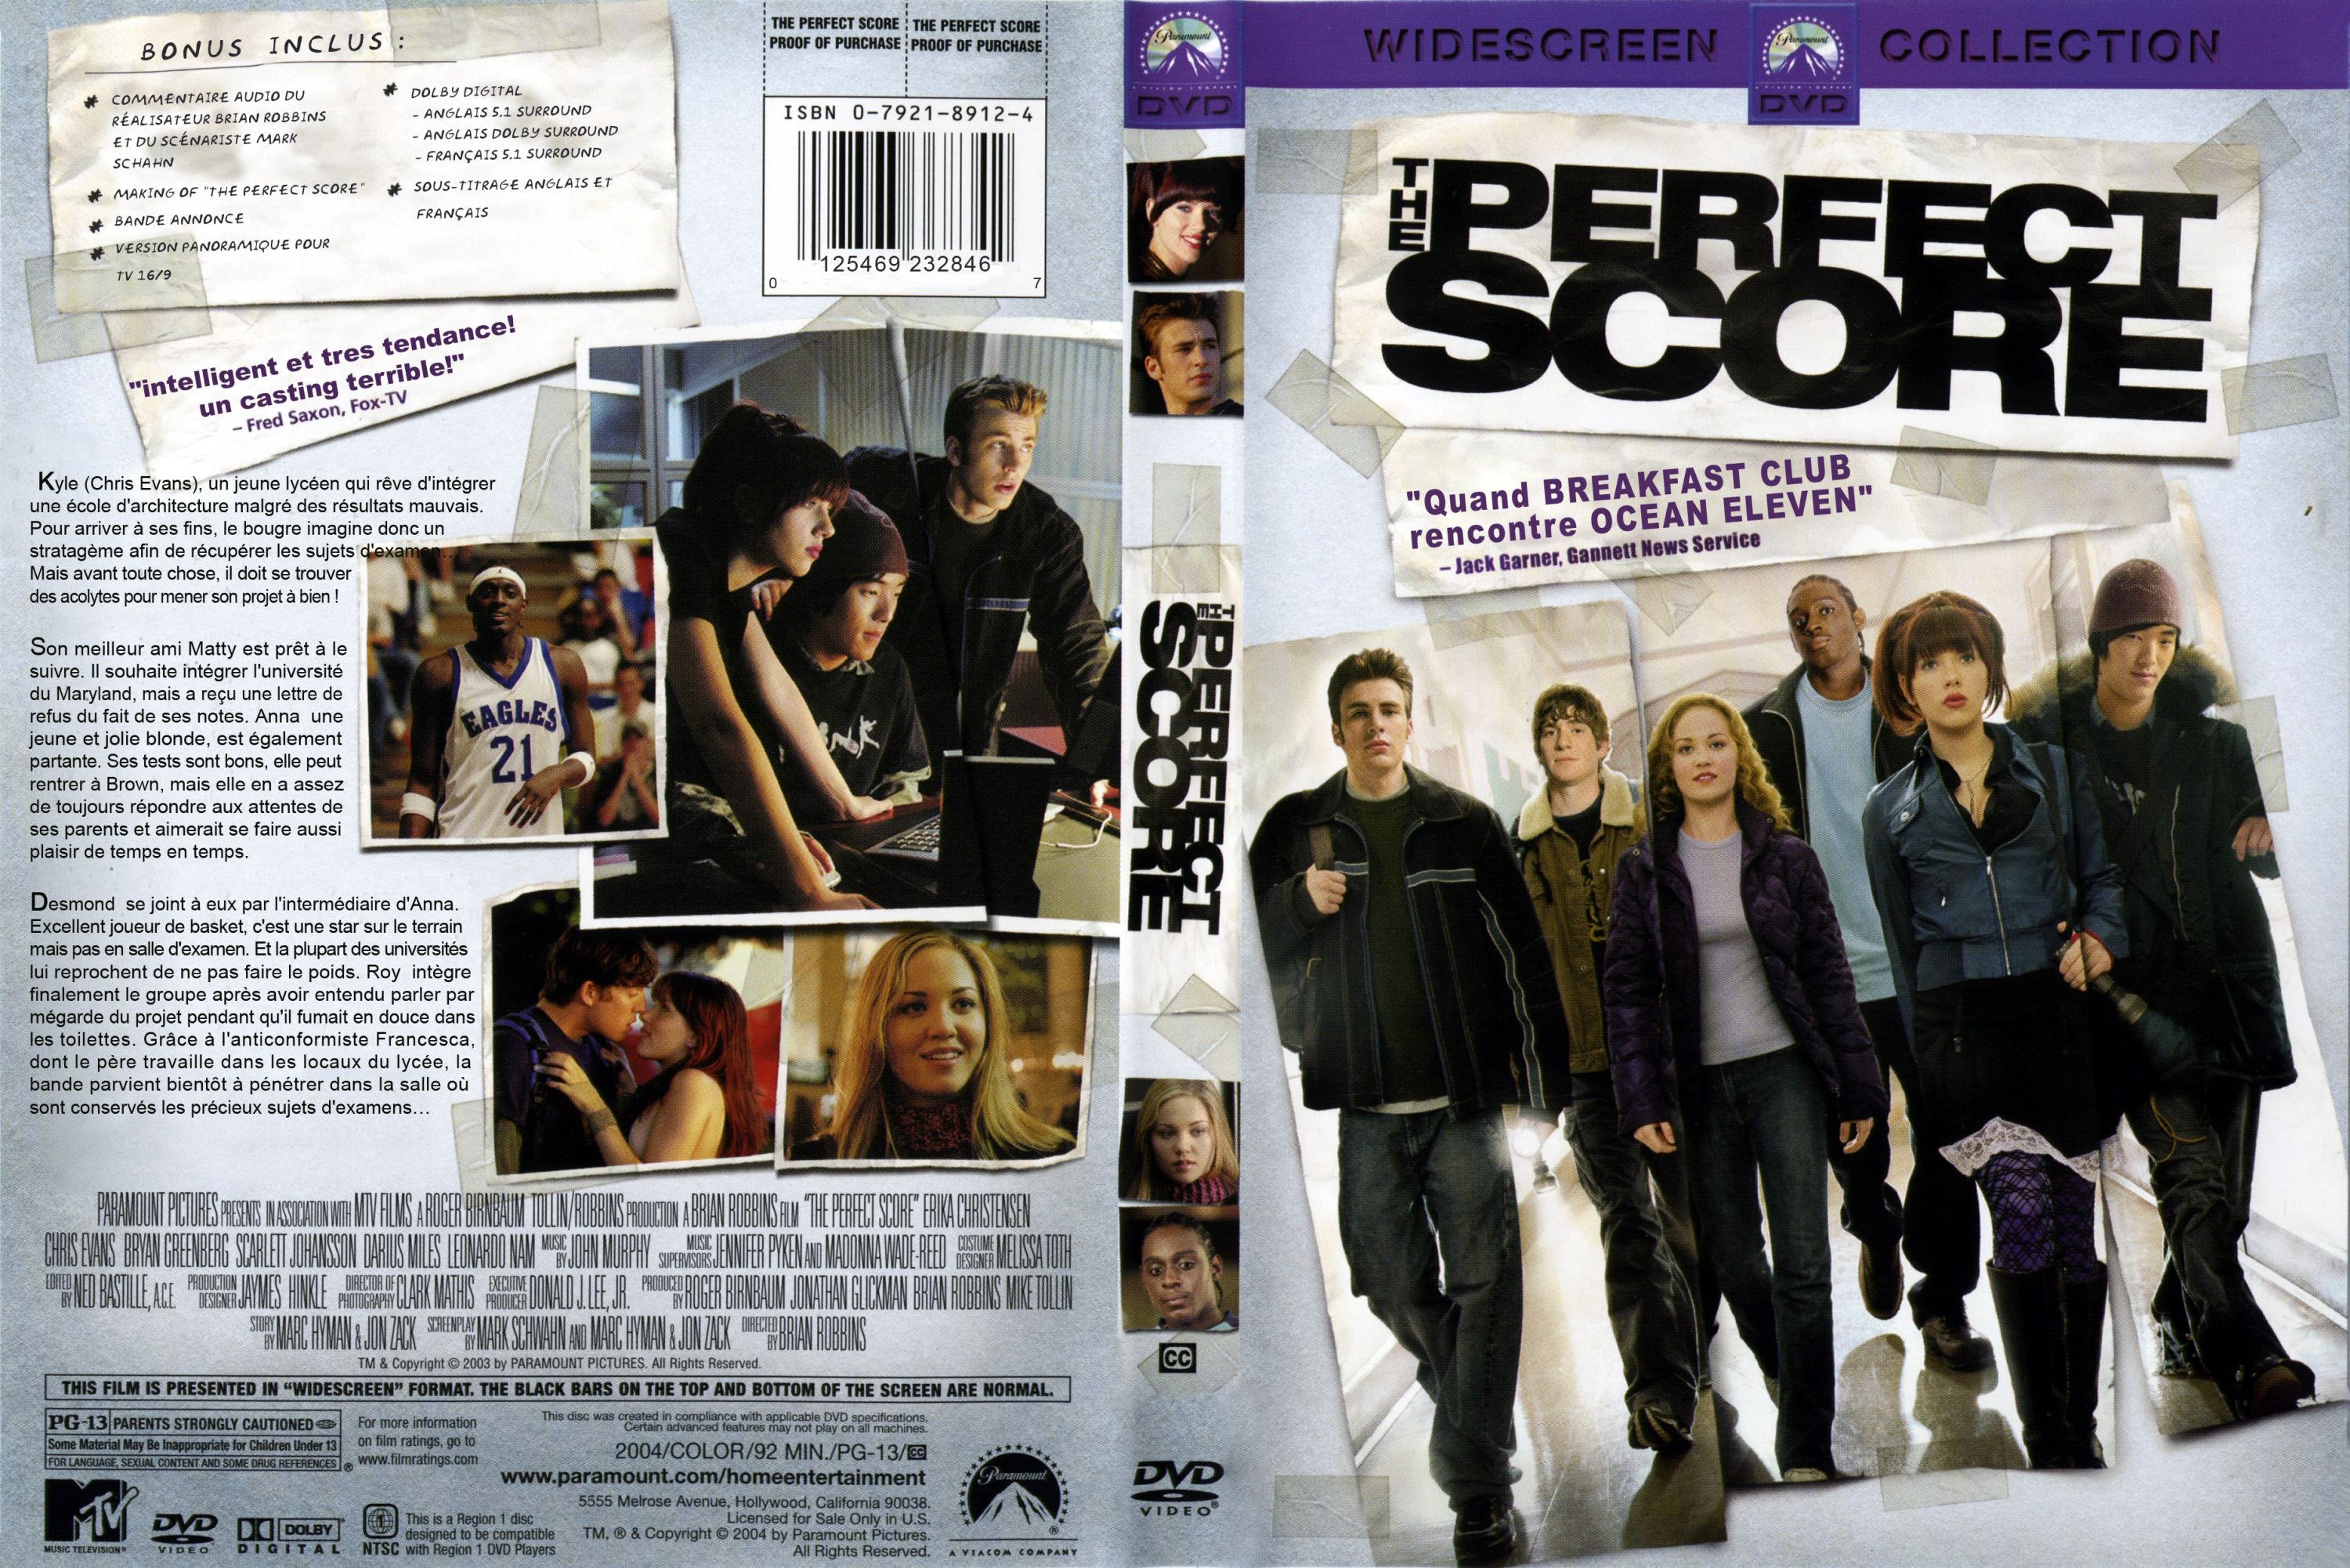 Jaquette DVD The perfect score